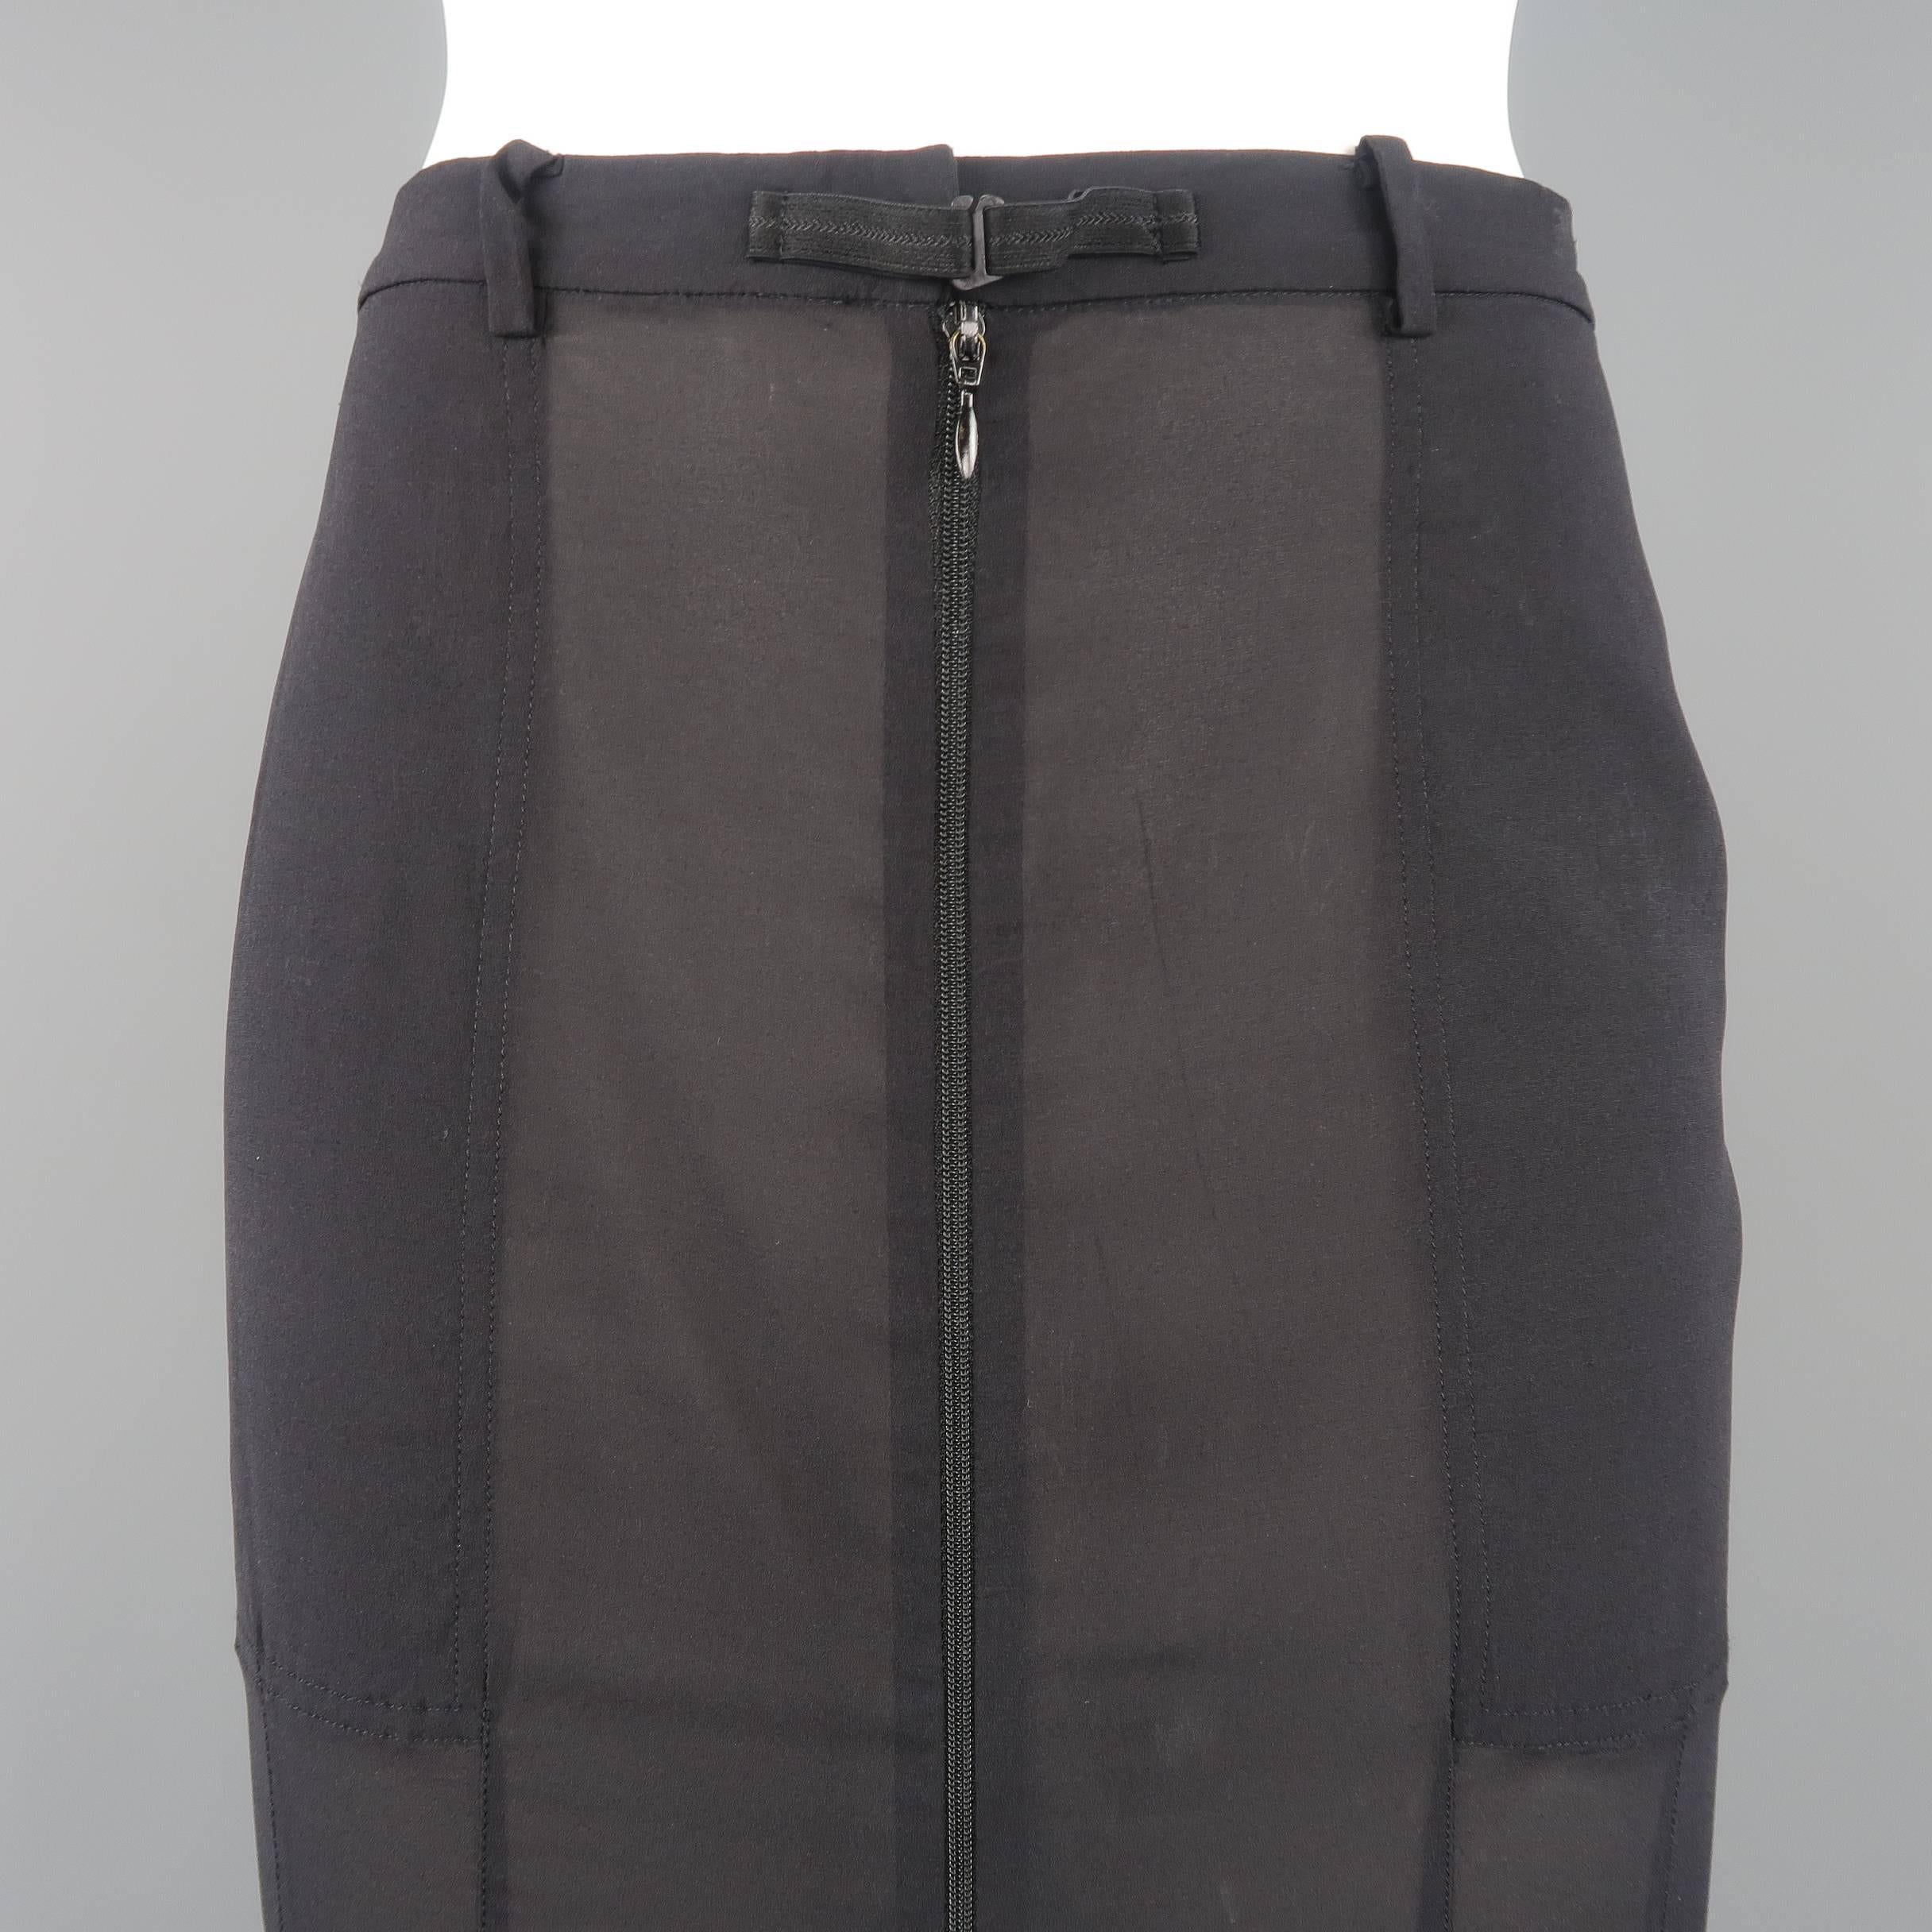 Dolce & Gabbana long pencil skirt comes in a light weight sheer stretch chiffon with a high rise, zipper piping details, back zip pockets, and zip fishtail silhouette. Tags removed. Wear throughout material. As is. Made in Italy.
 
Fair Pre-Owned